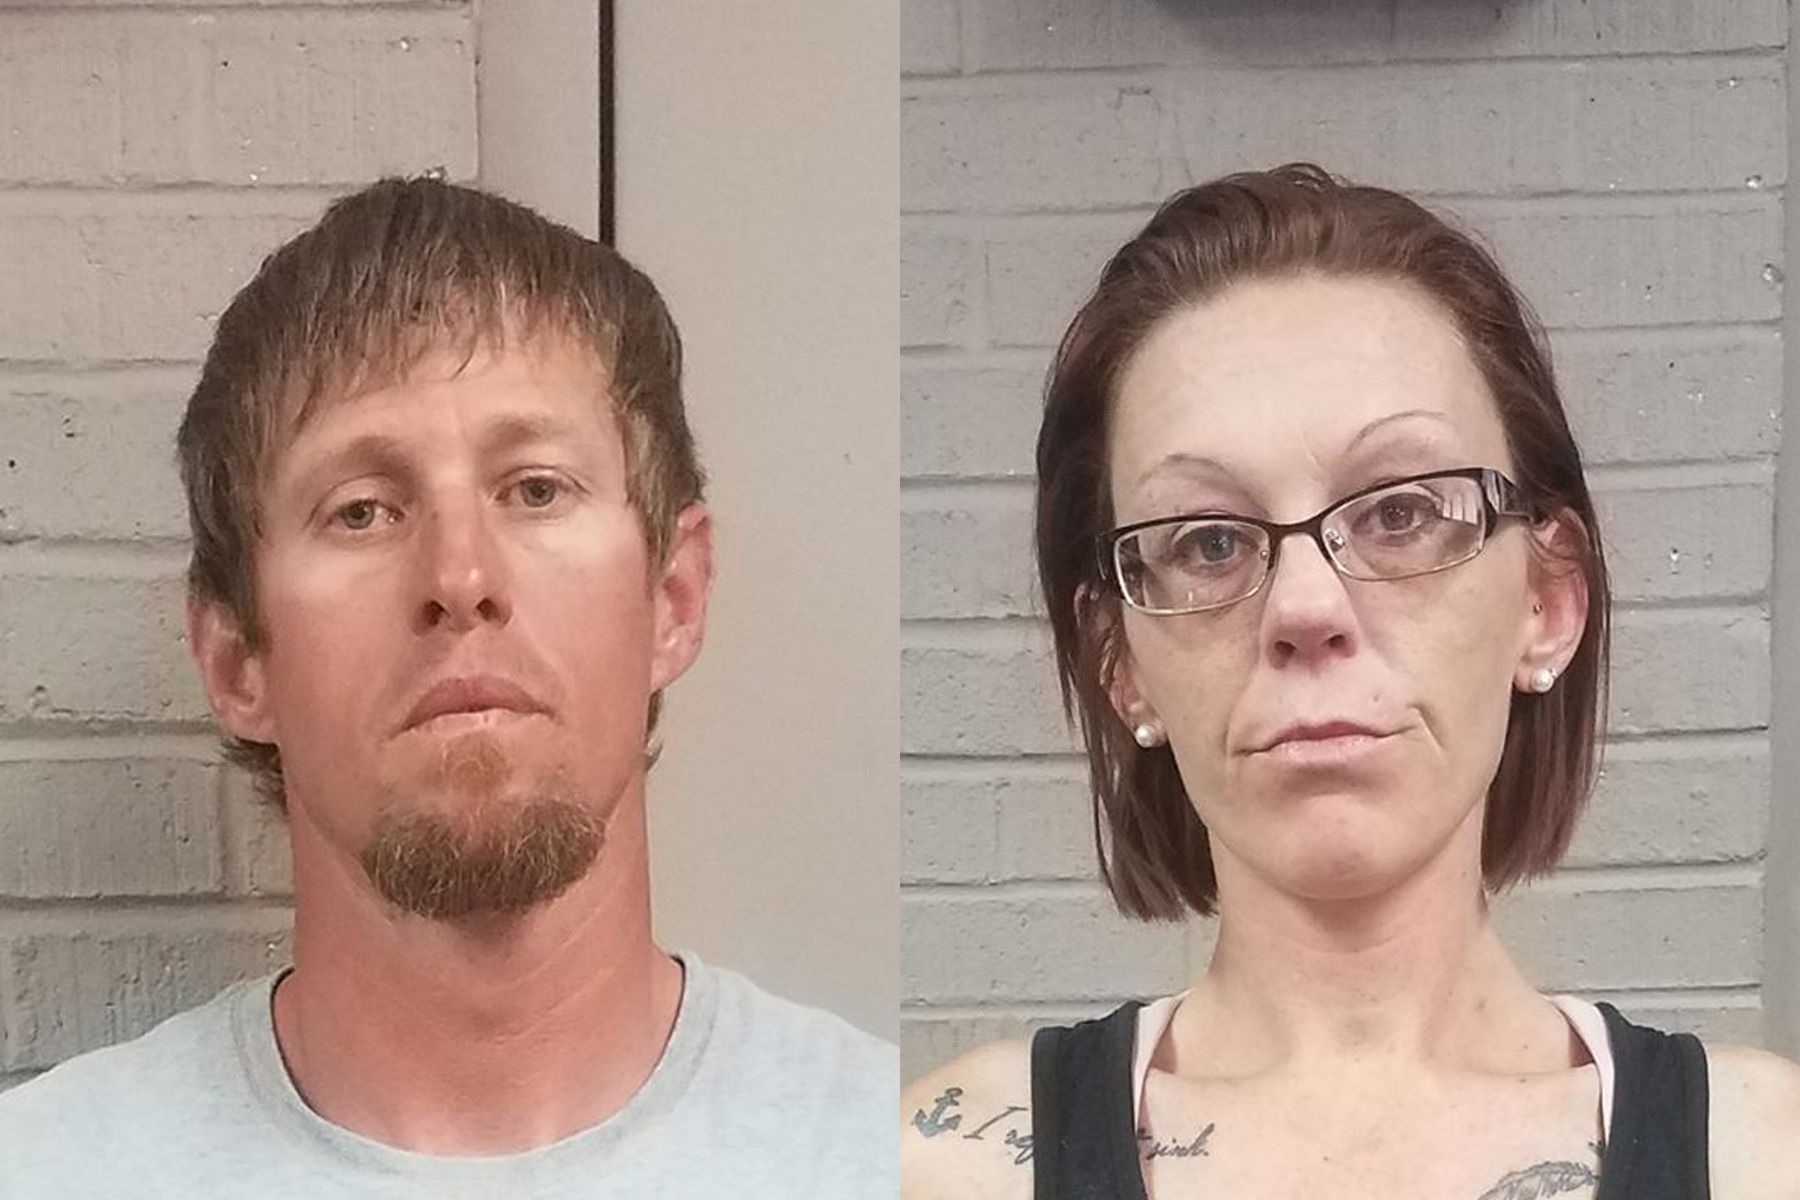 Couple Arrested After Allegedly Filming Themselves Having Sex At A Library, Walmart, And Burger King Then Uploading Video To PornHub News picture